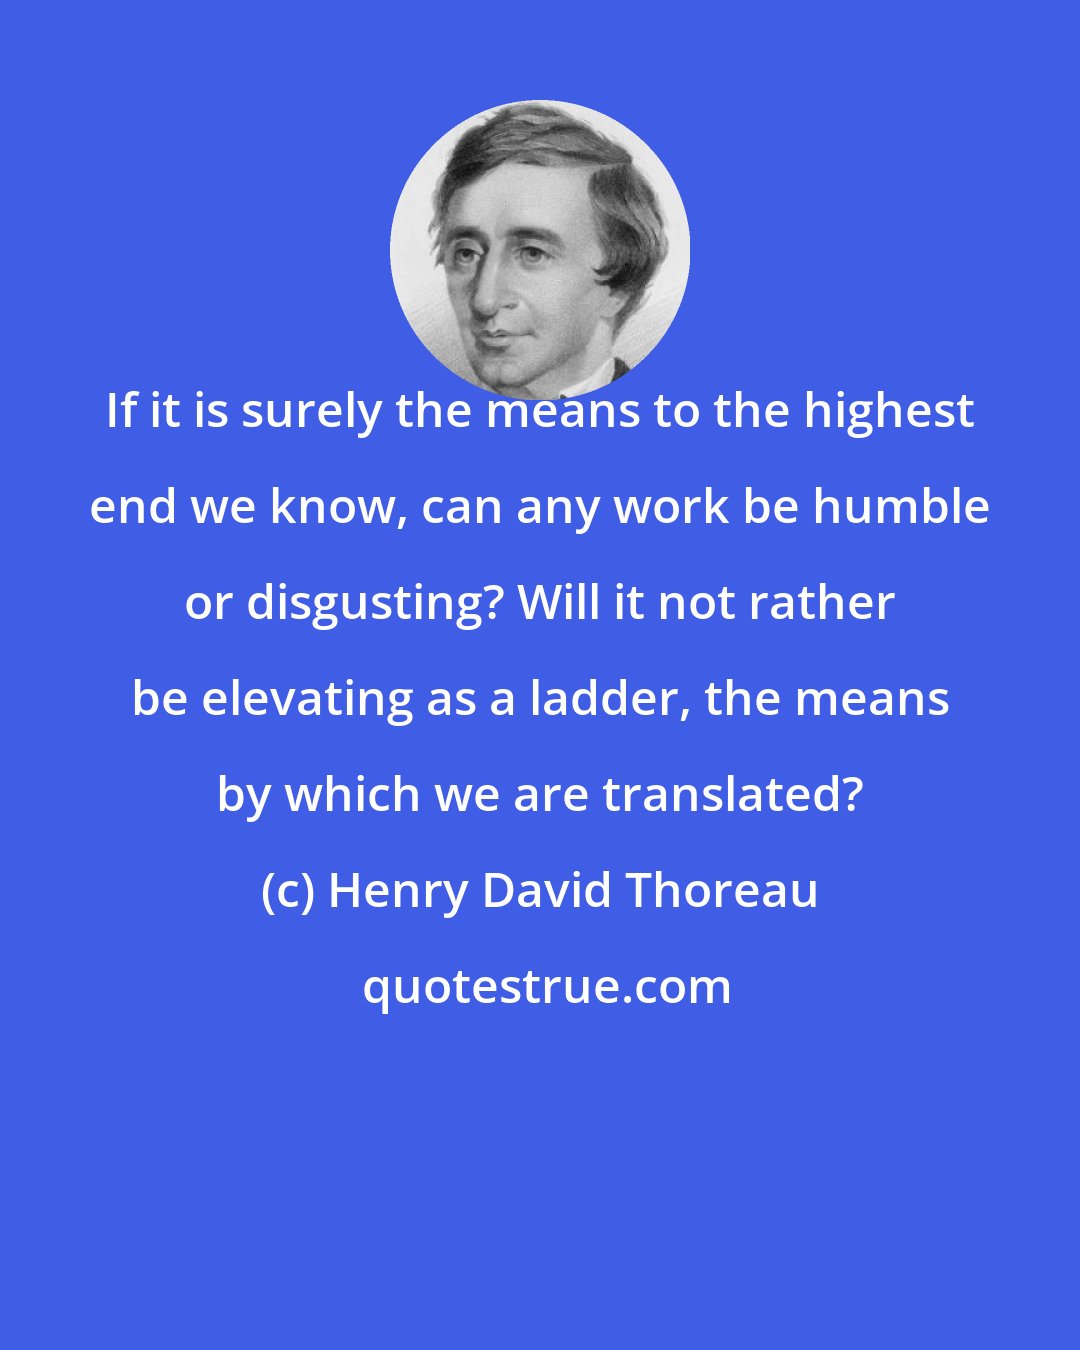 Henry David Thoreau: If it is surely the means to the highest end we know, can any work be humble or disgusting? Will it not rather be elevating as a ladder, the means by which we are translated?